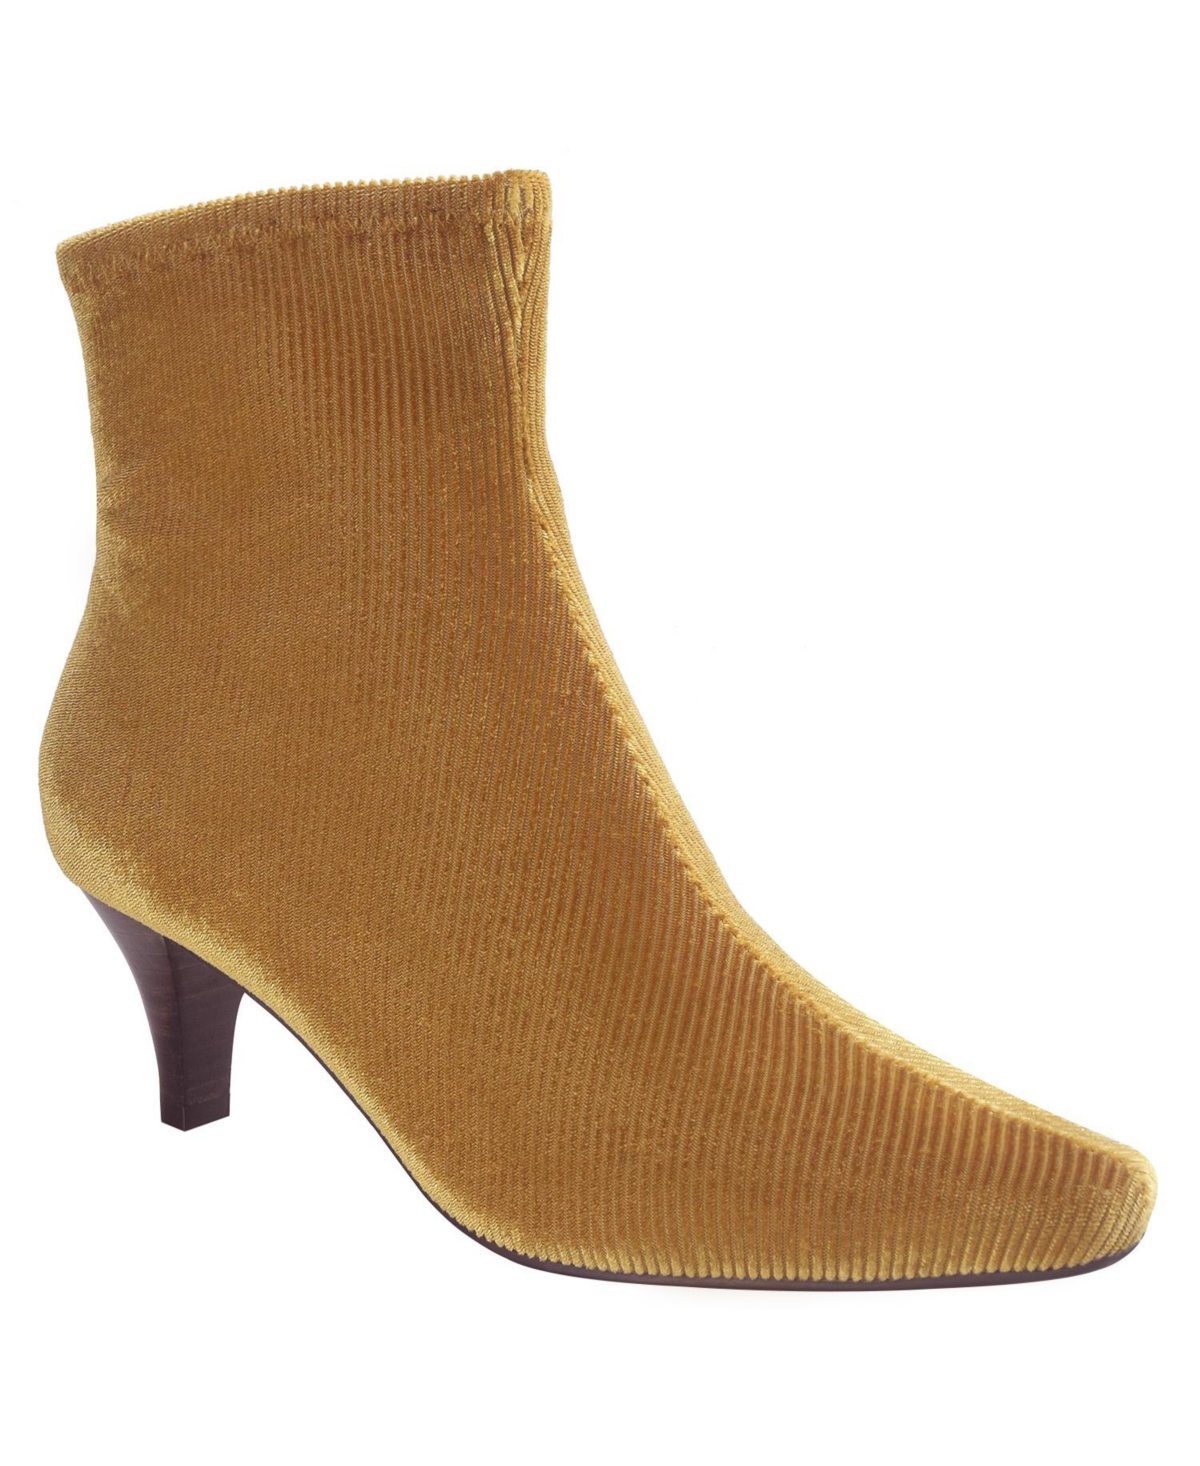 Women's Naja Cord Stretch Ankle Booties with Memory Foam - Ginger